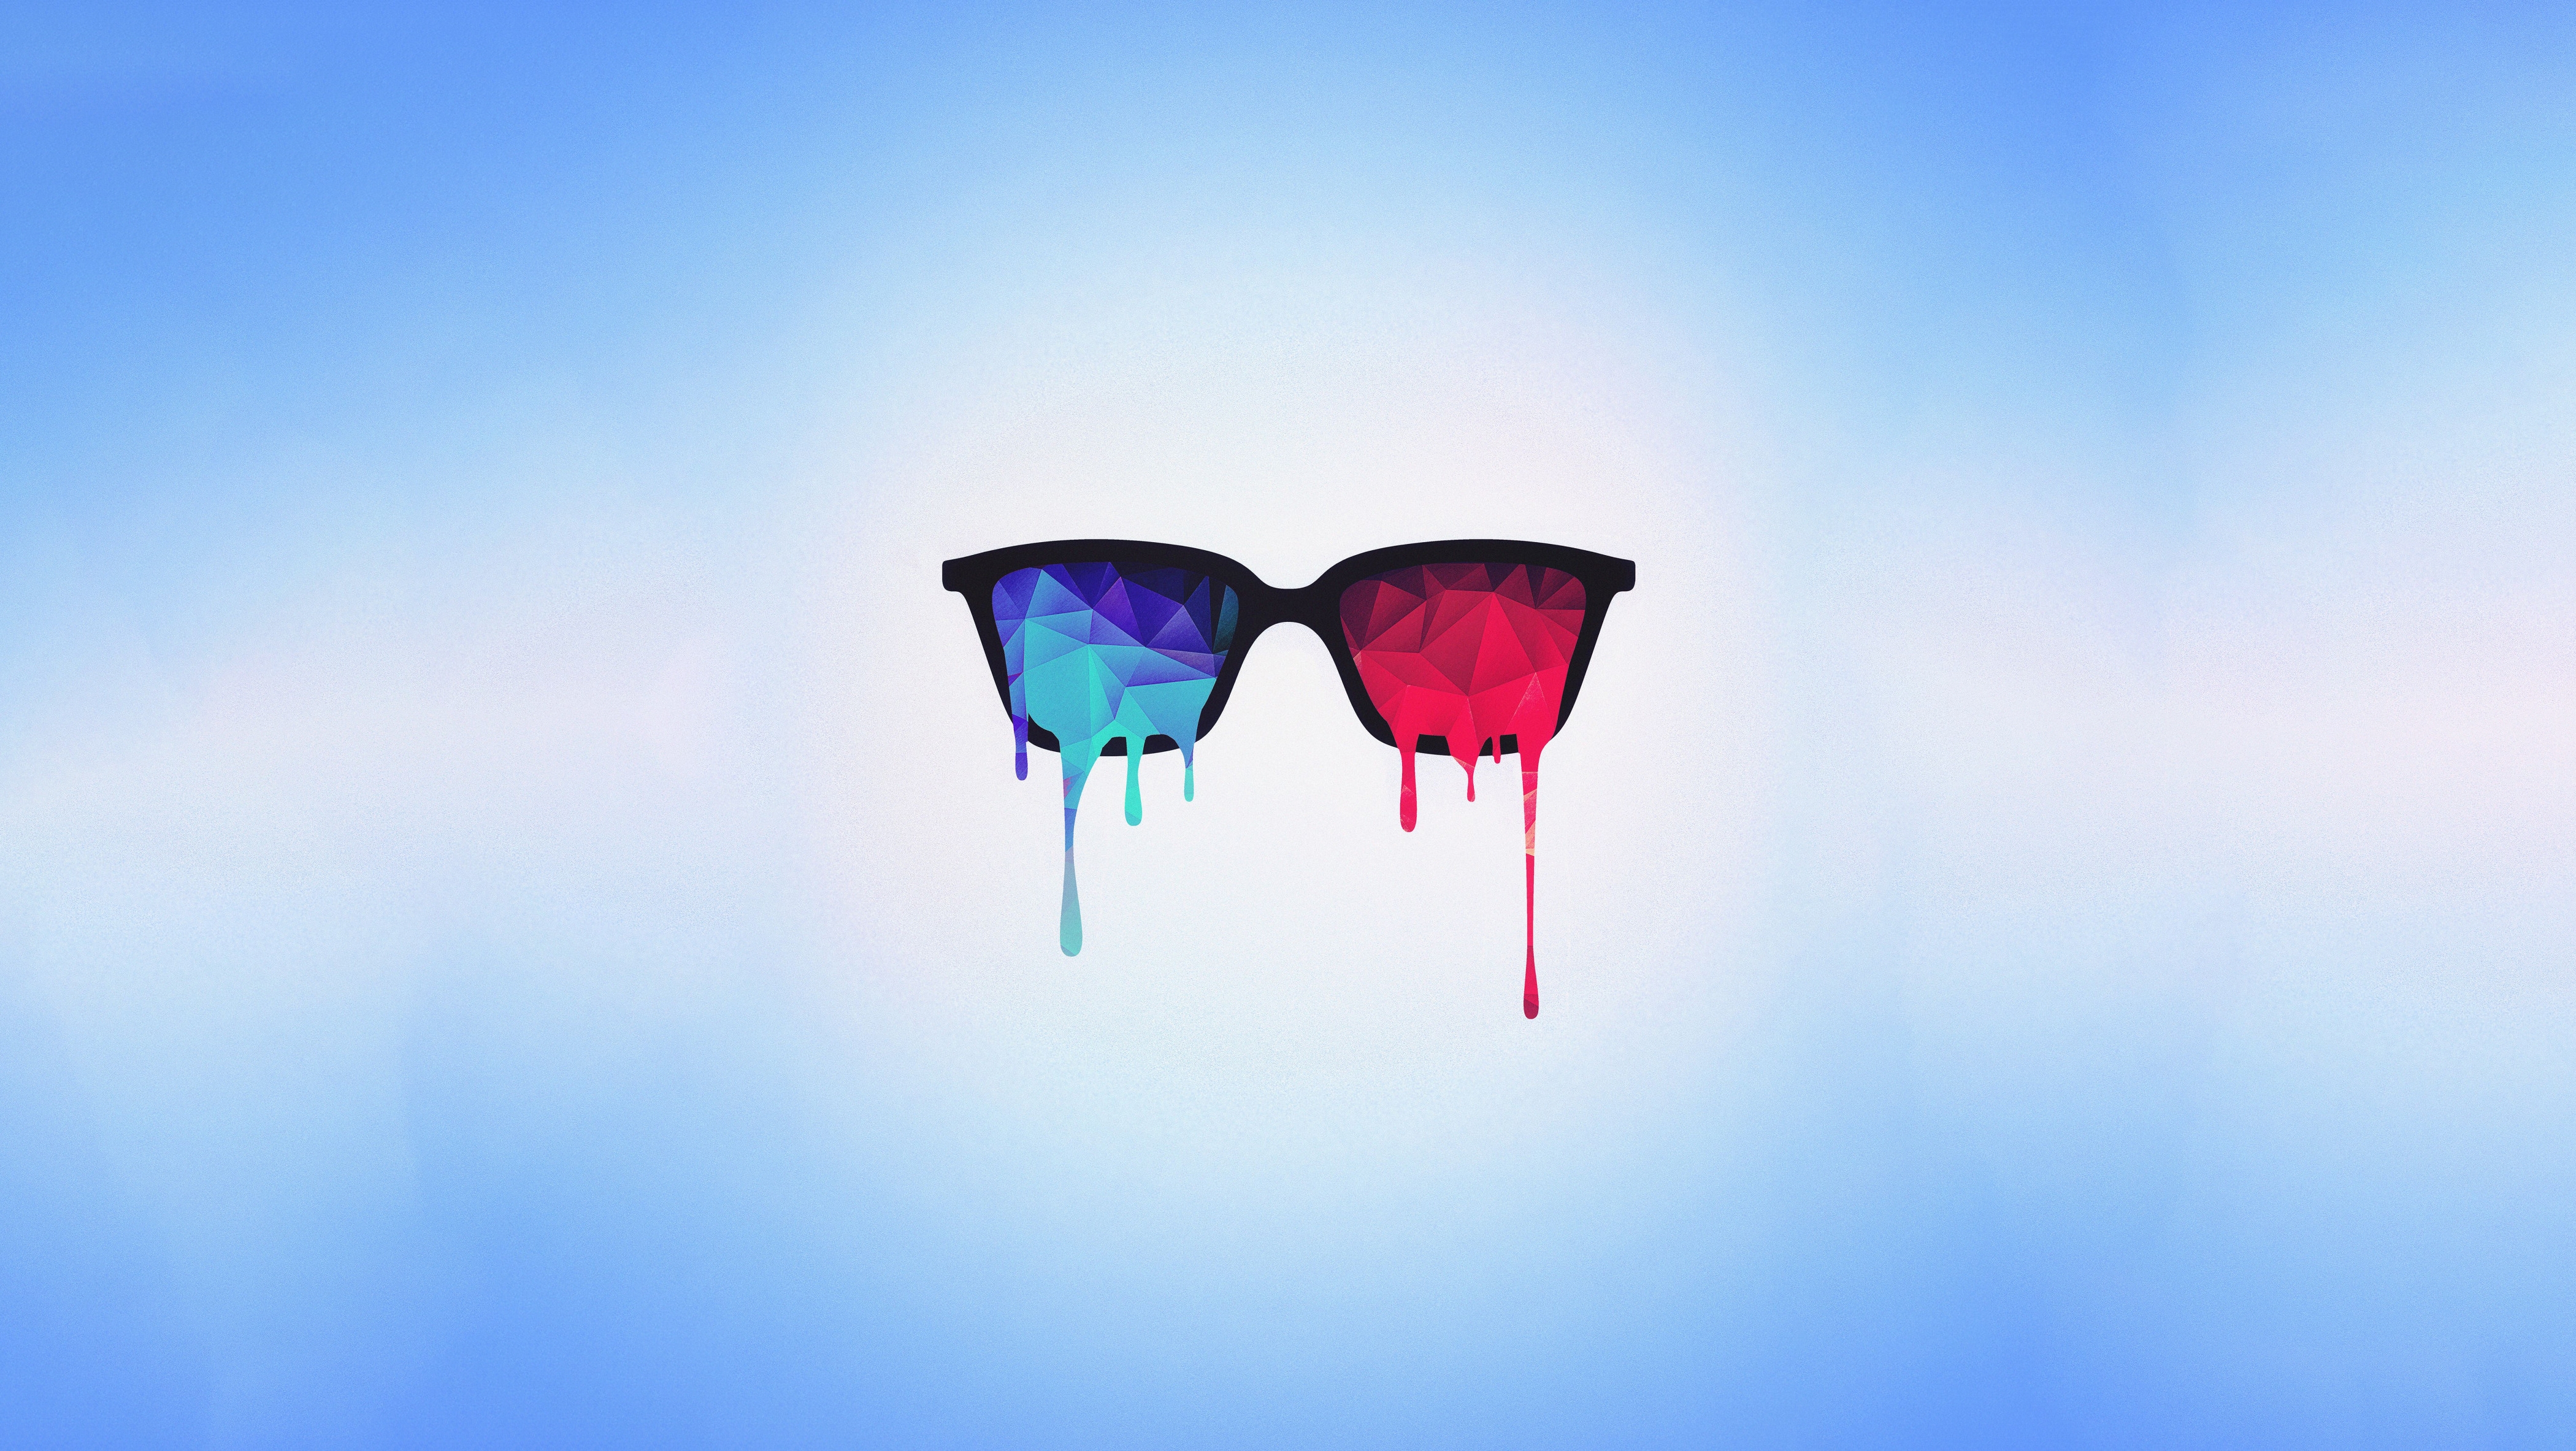 HD wallpaper, Cool Glasses, Drippy, Drippy Sunglasses, Low Poly, 3D Psychedelic, Blue Abstract